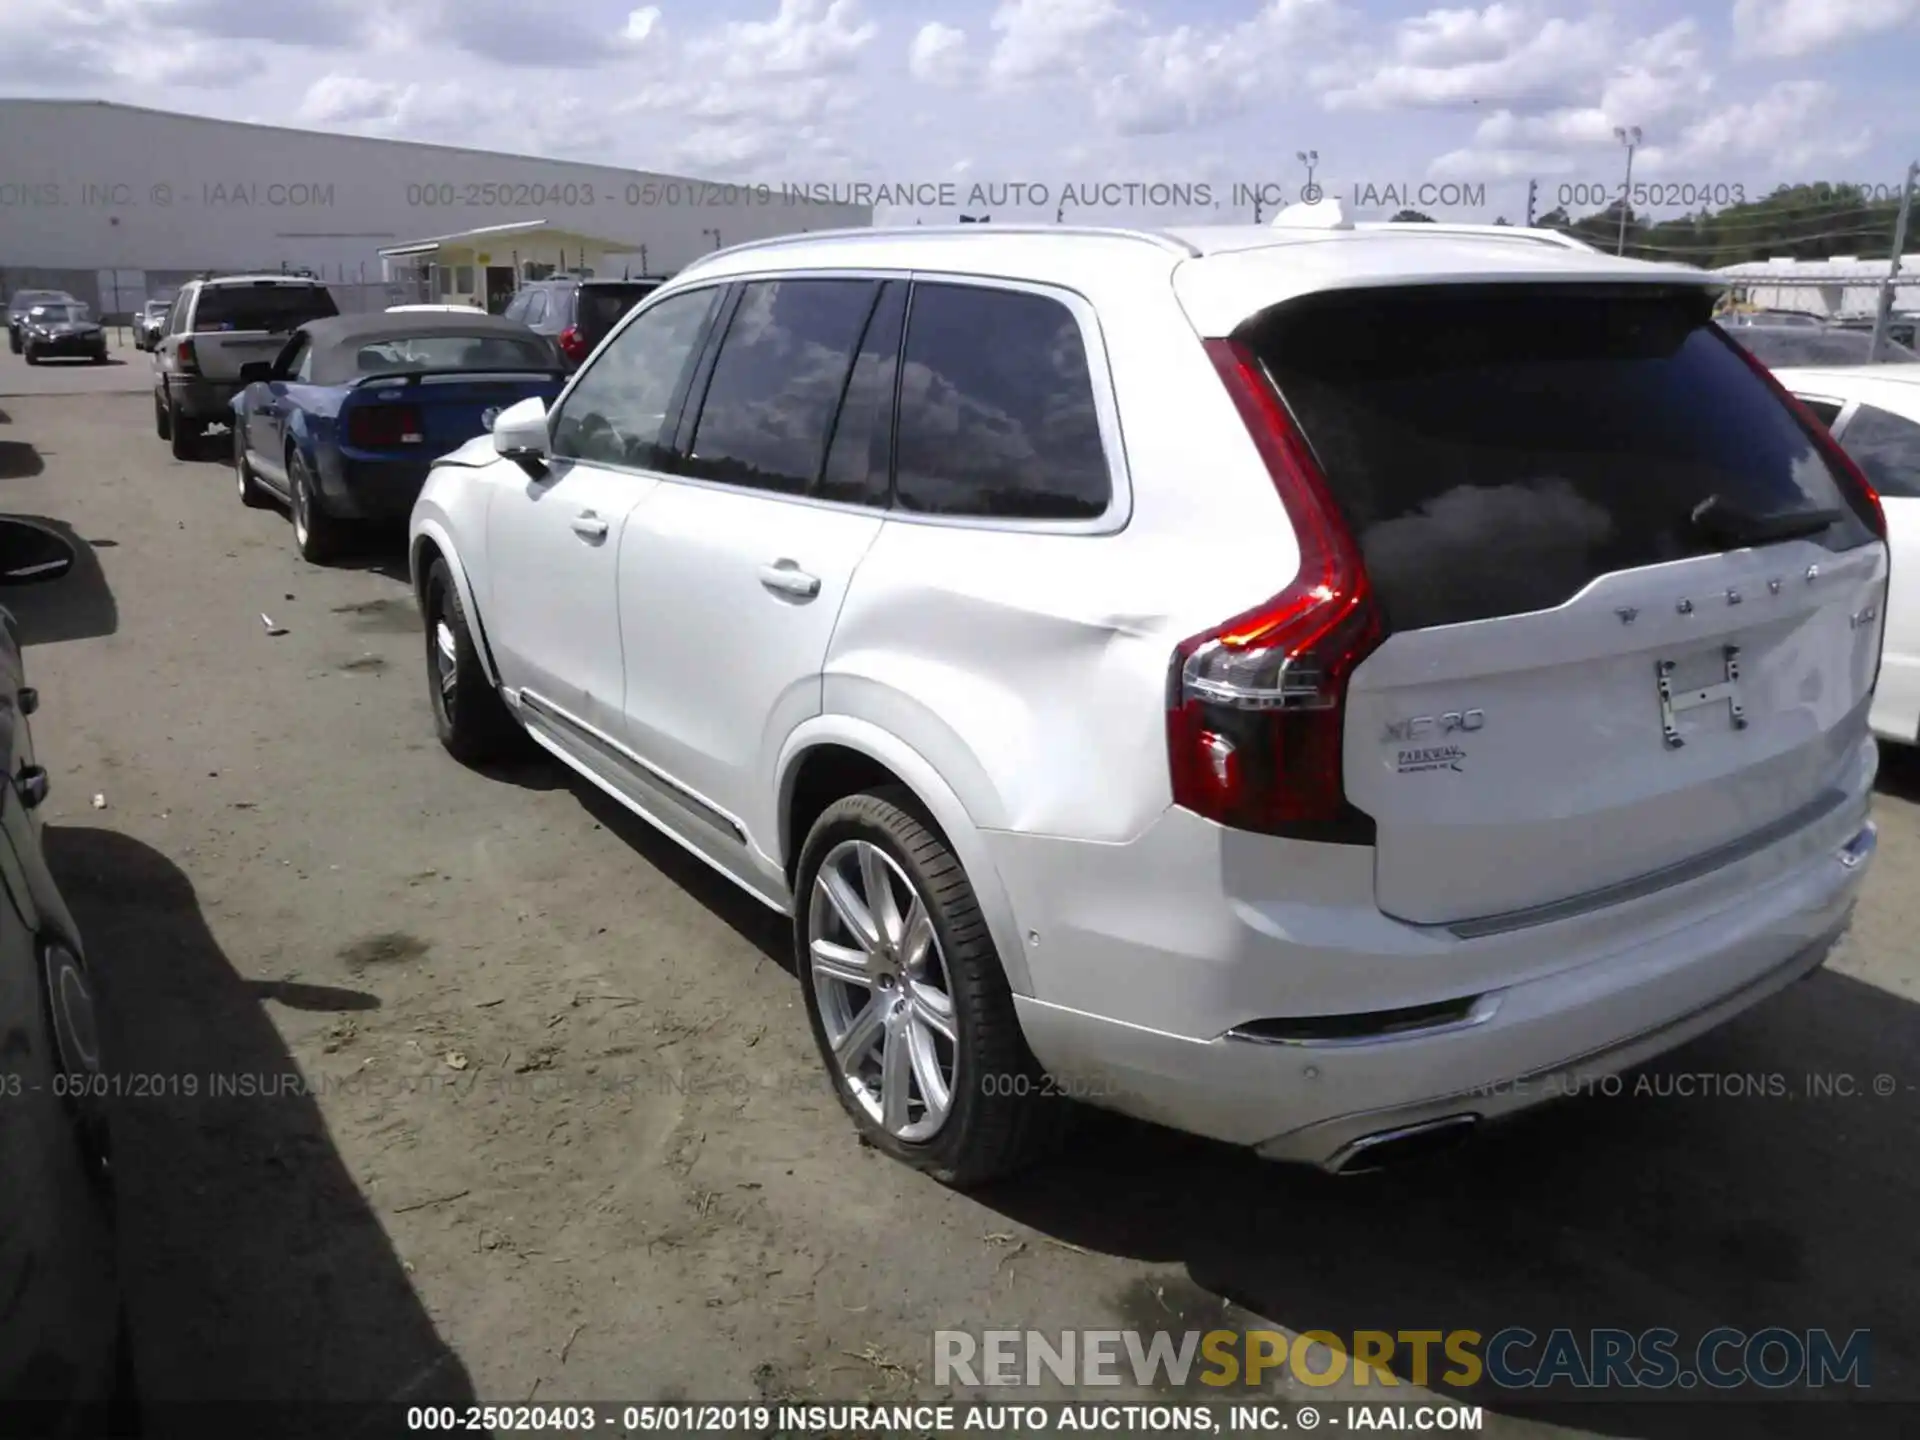 3 Photograph of a damaged car YV4A22PLXK1431420 VOLVO XC90 2019